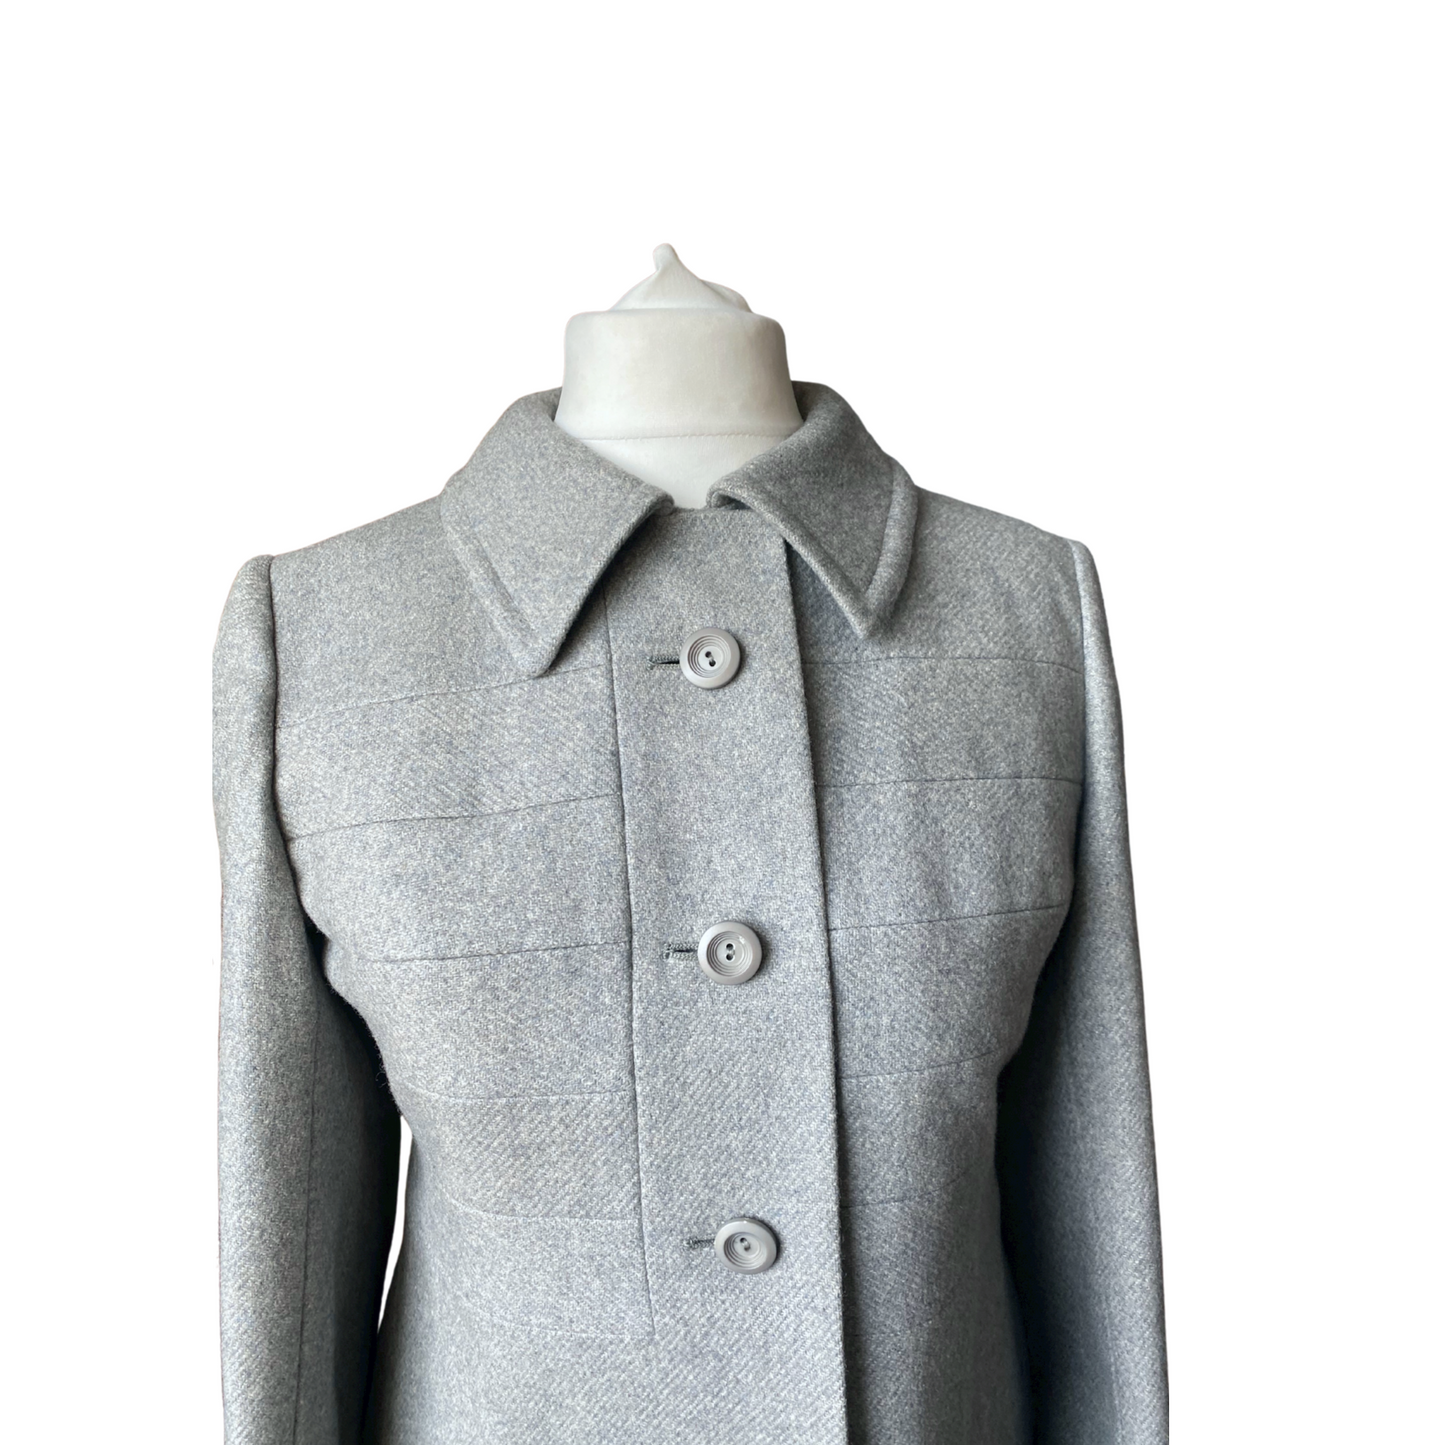 Grey wool 70s vintage coat - Stylish winter fashion with neutral easy wear style